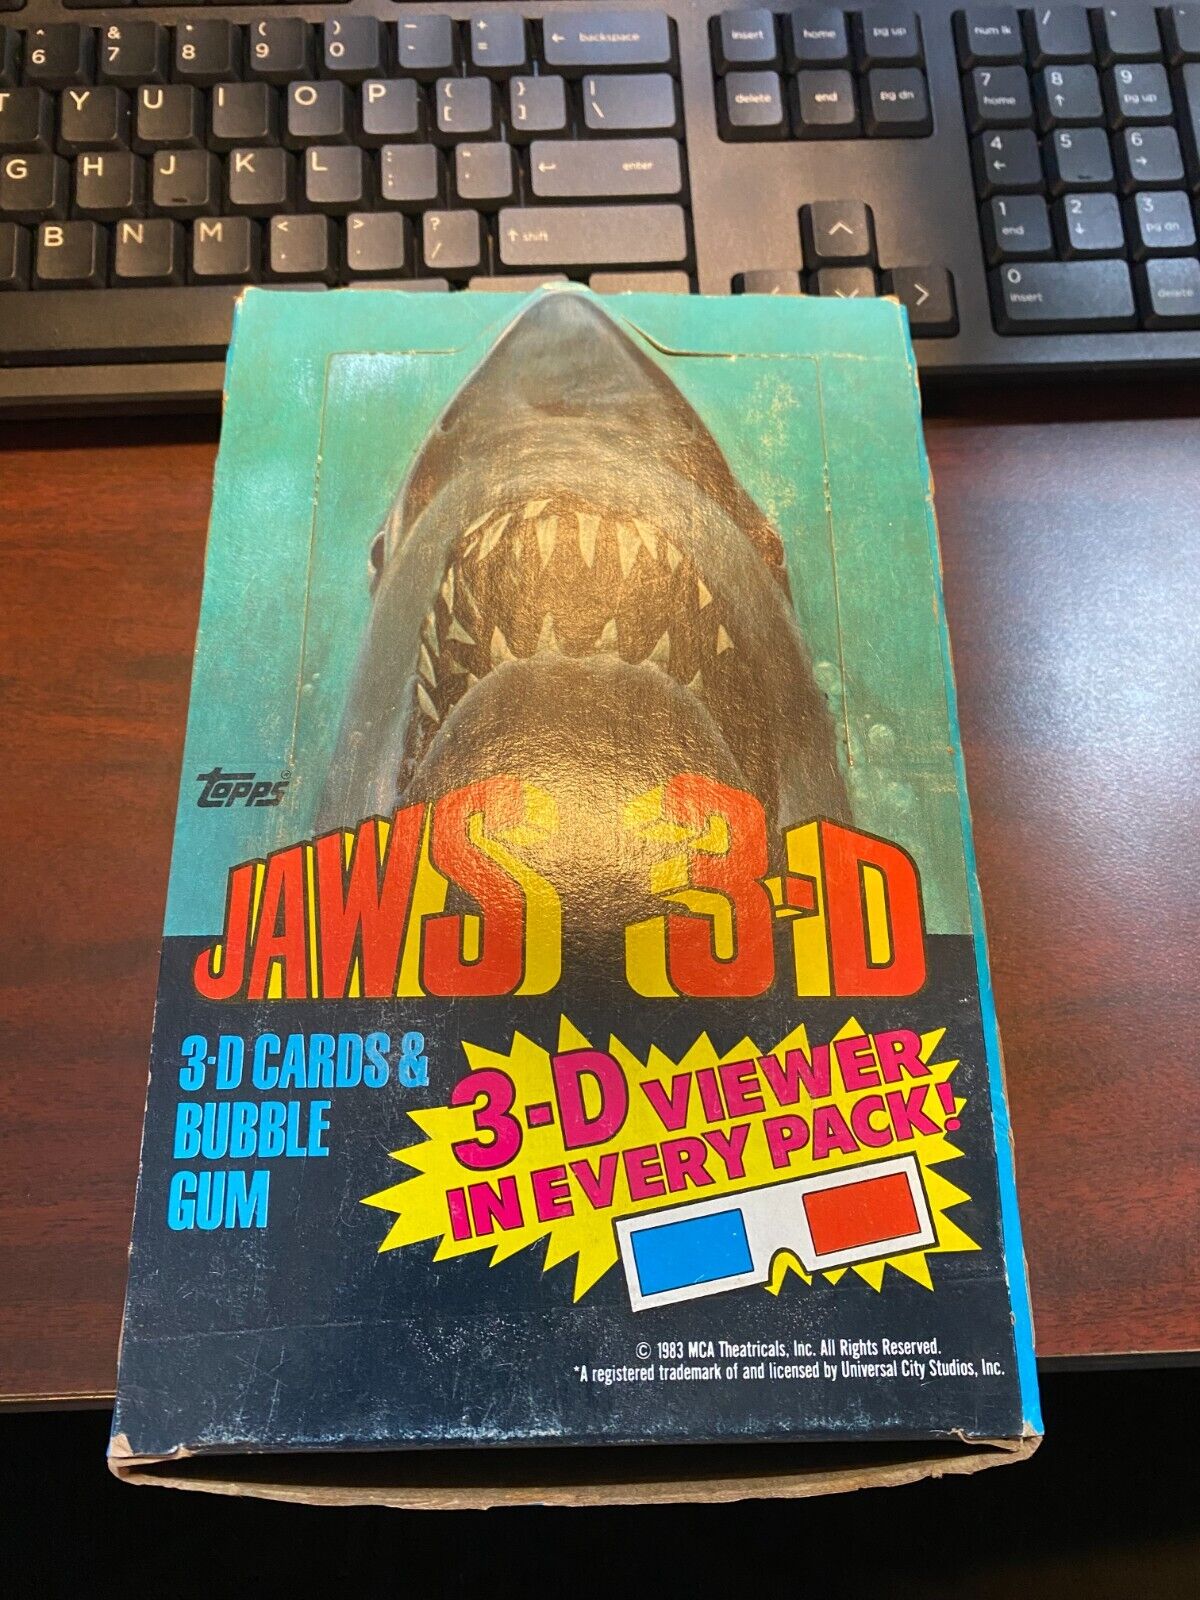 Topps Jaws 3 Box 36 sealed Packs condition of box and packs is amazing.